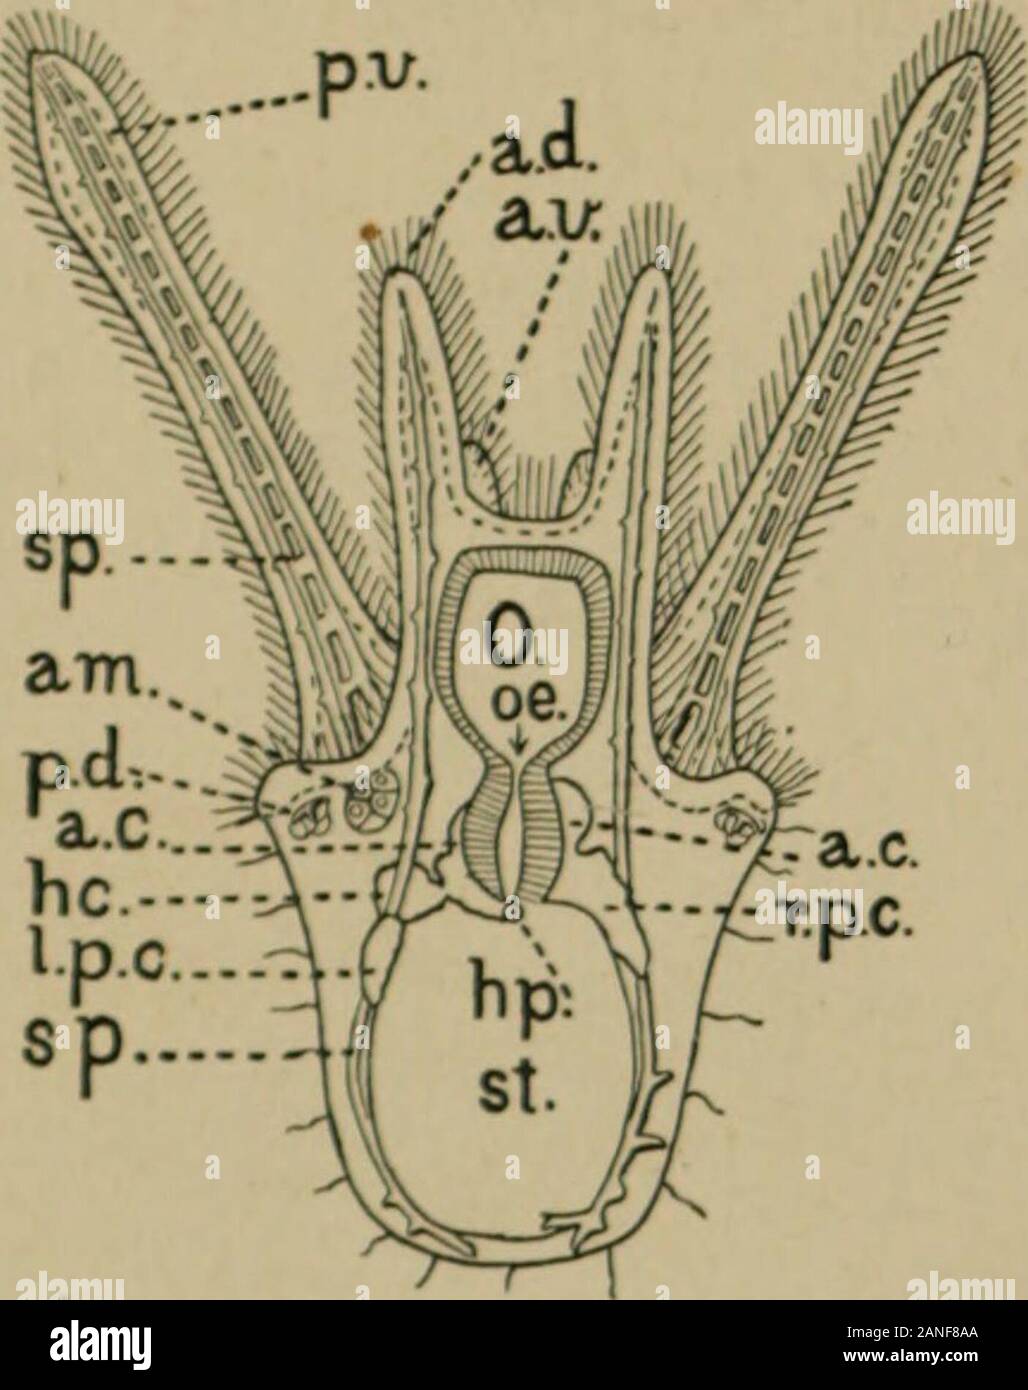 A treatise on zoology . f the water-vascular system. The development of Echinoidea has been studied by J. Miiller(1852), Agassiz (1864), Metschnikoff (1869), Bury (1889), andmany others. The results are summarised by Theel in his admir-able account of the development of Echinocyamus pusillus (1892).Up to the stage corresponding to the Dipleurula no importantdivergences are manifest. The peculiarities of the ensuing meta-morphosis appear due to the extreme development of a free-swimming Pluteus (Fig. XIV.). At an early stage there is aninvagination (am) of the ectoderm on the left side between Stock Photo